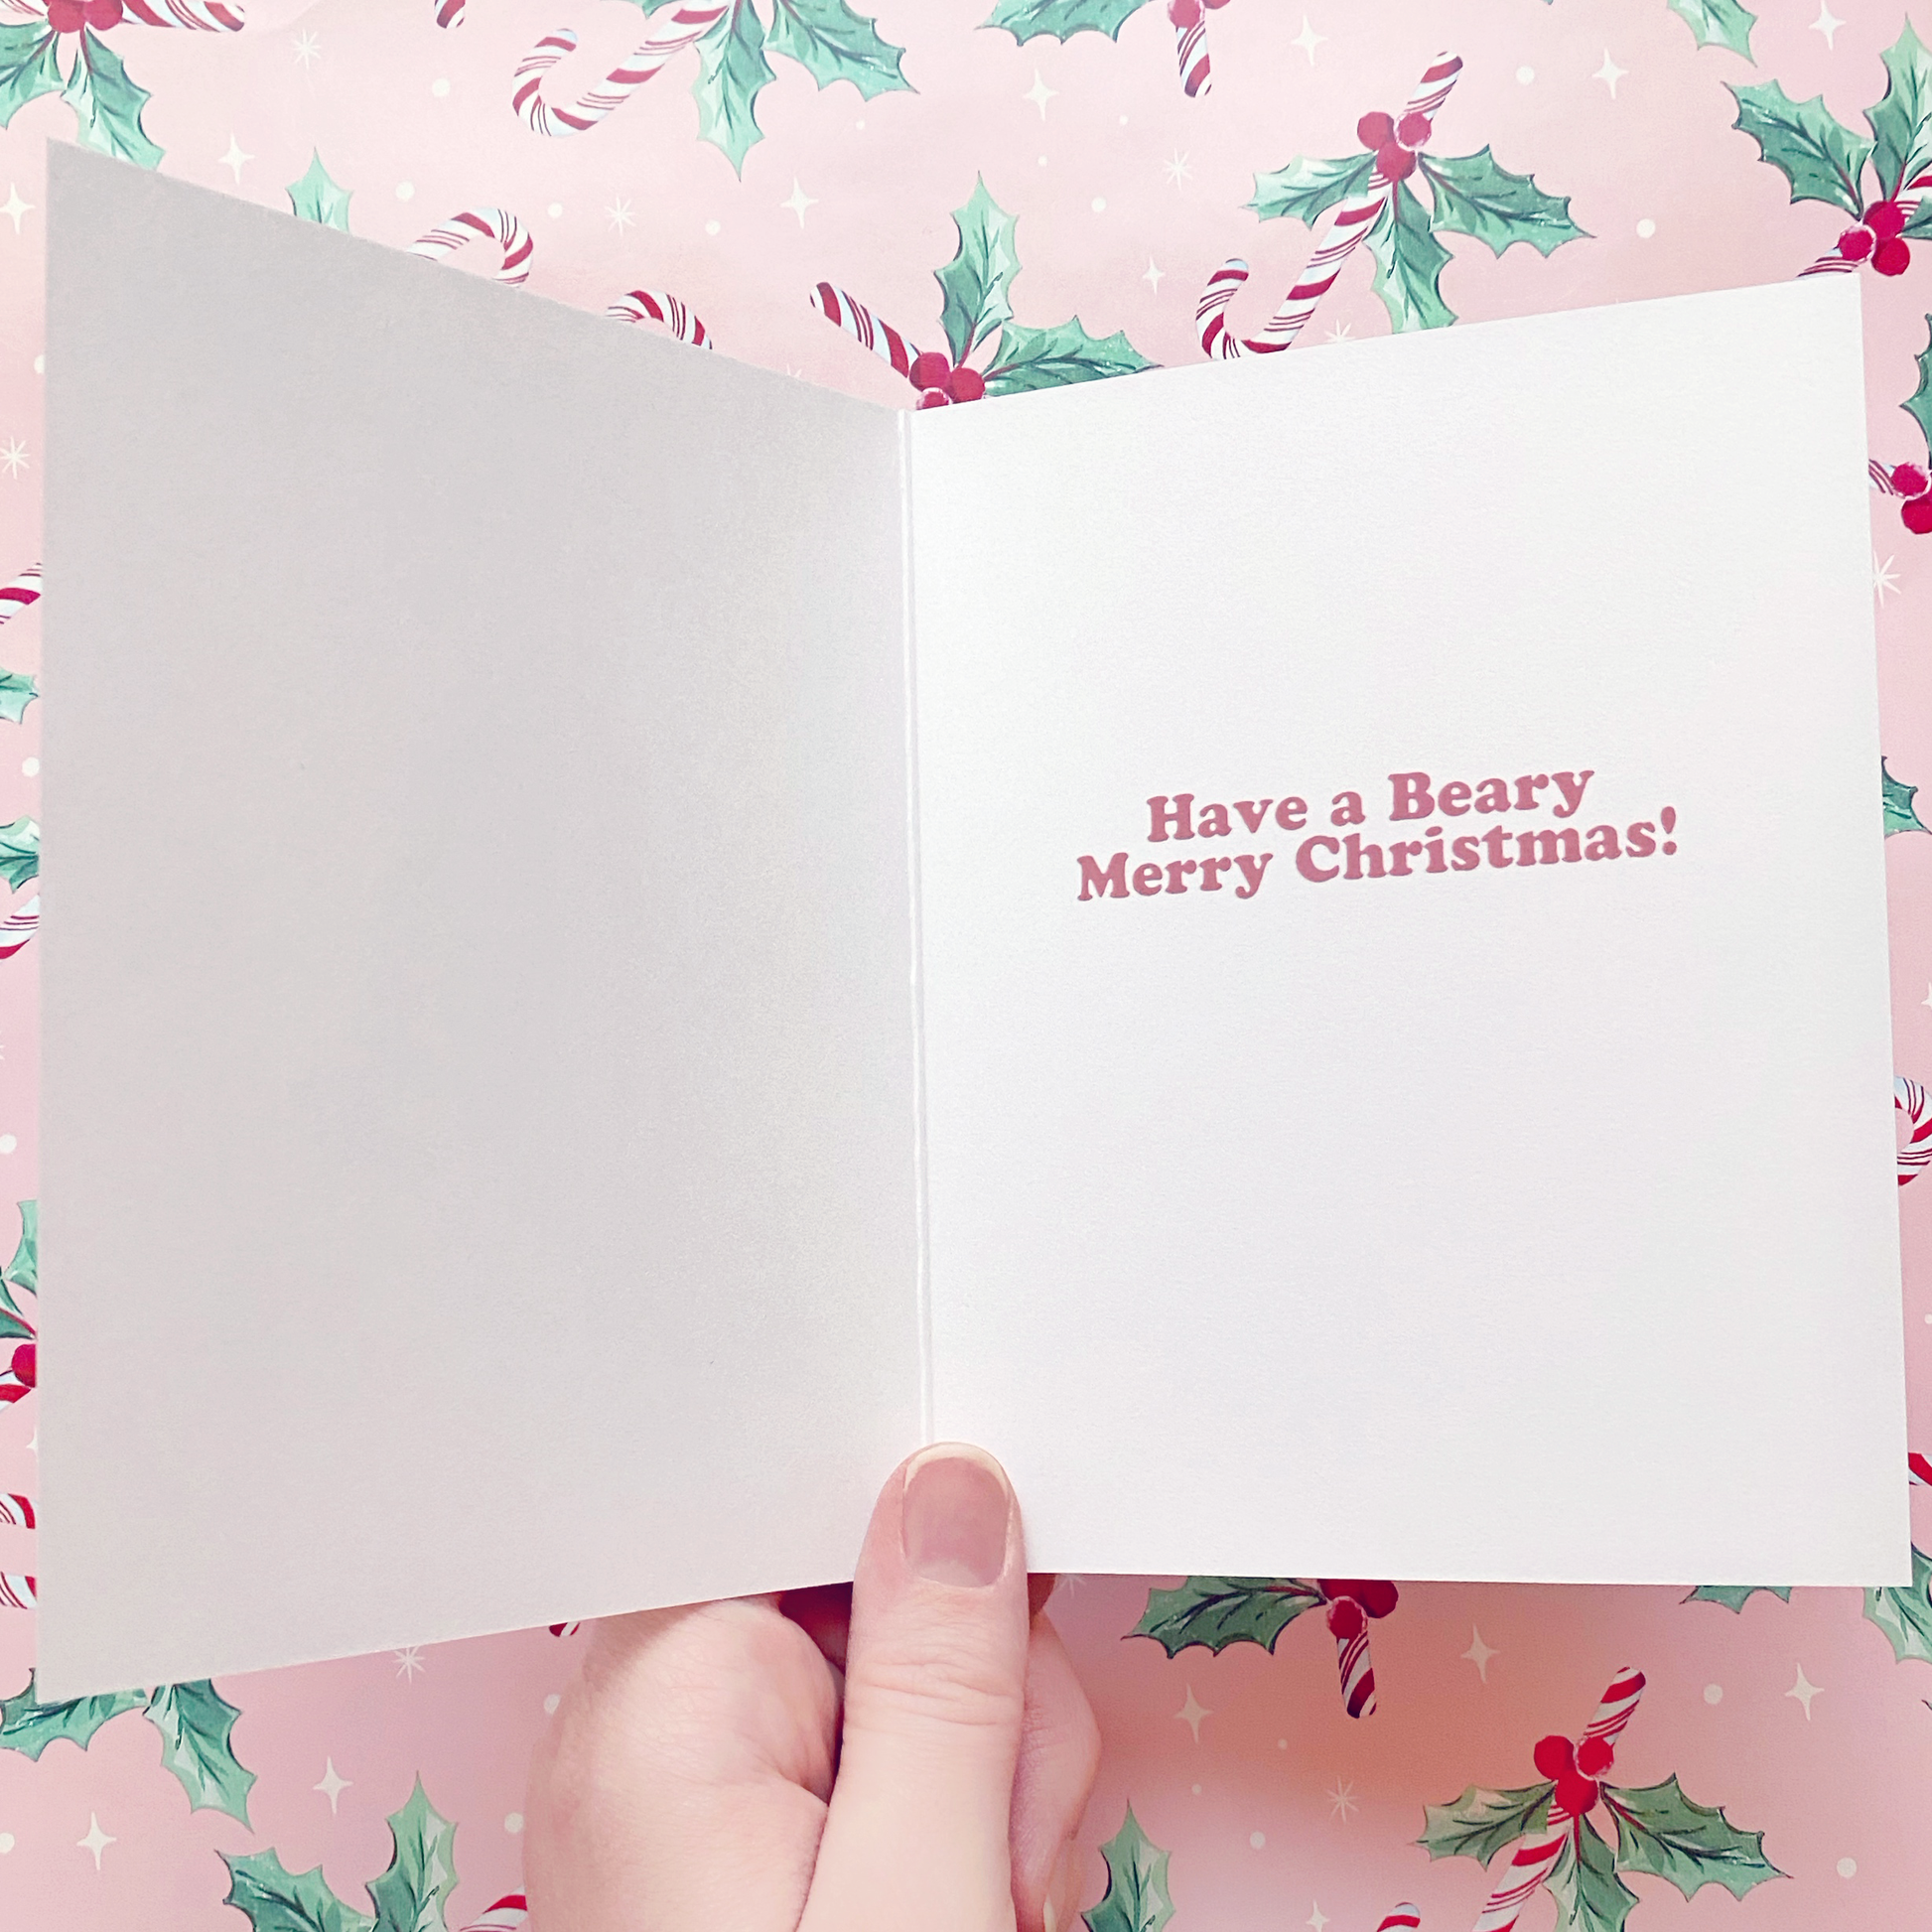 Inside of A2 Christmas card with the quote "Have a Beary Merry Christmas!" on the inside right side. Photographed on a pastel pink wrapping paper background with red and white candy canes and green and red bunches of holly.